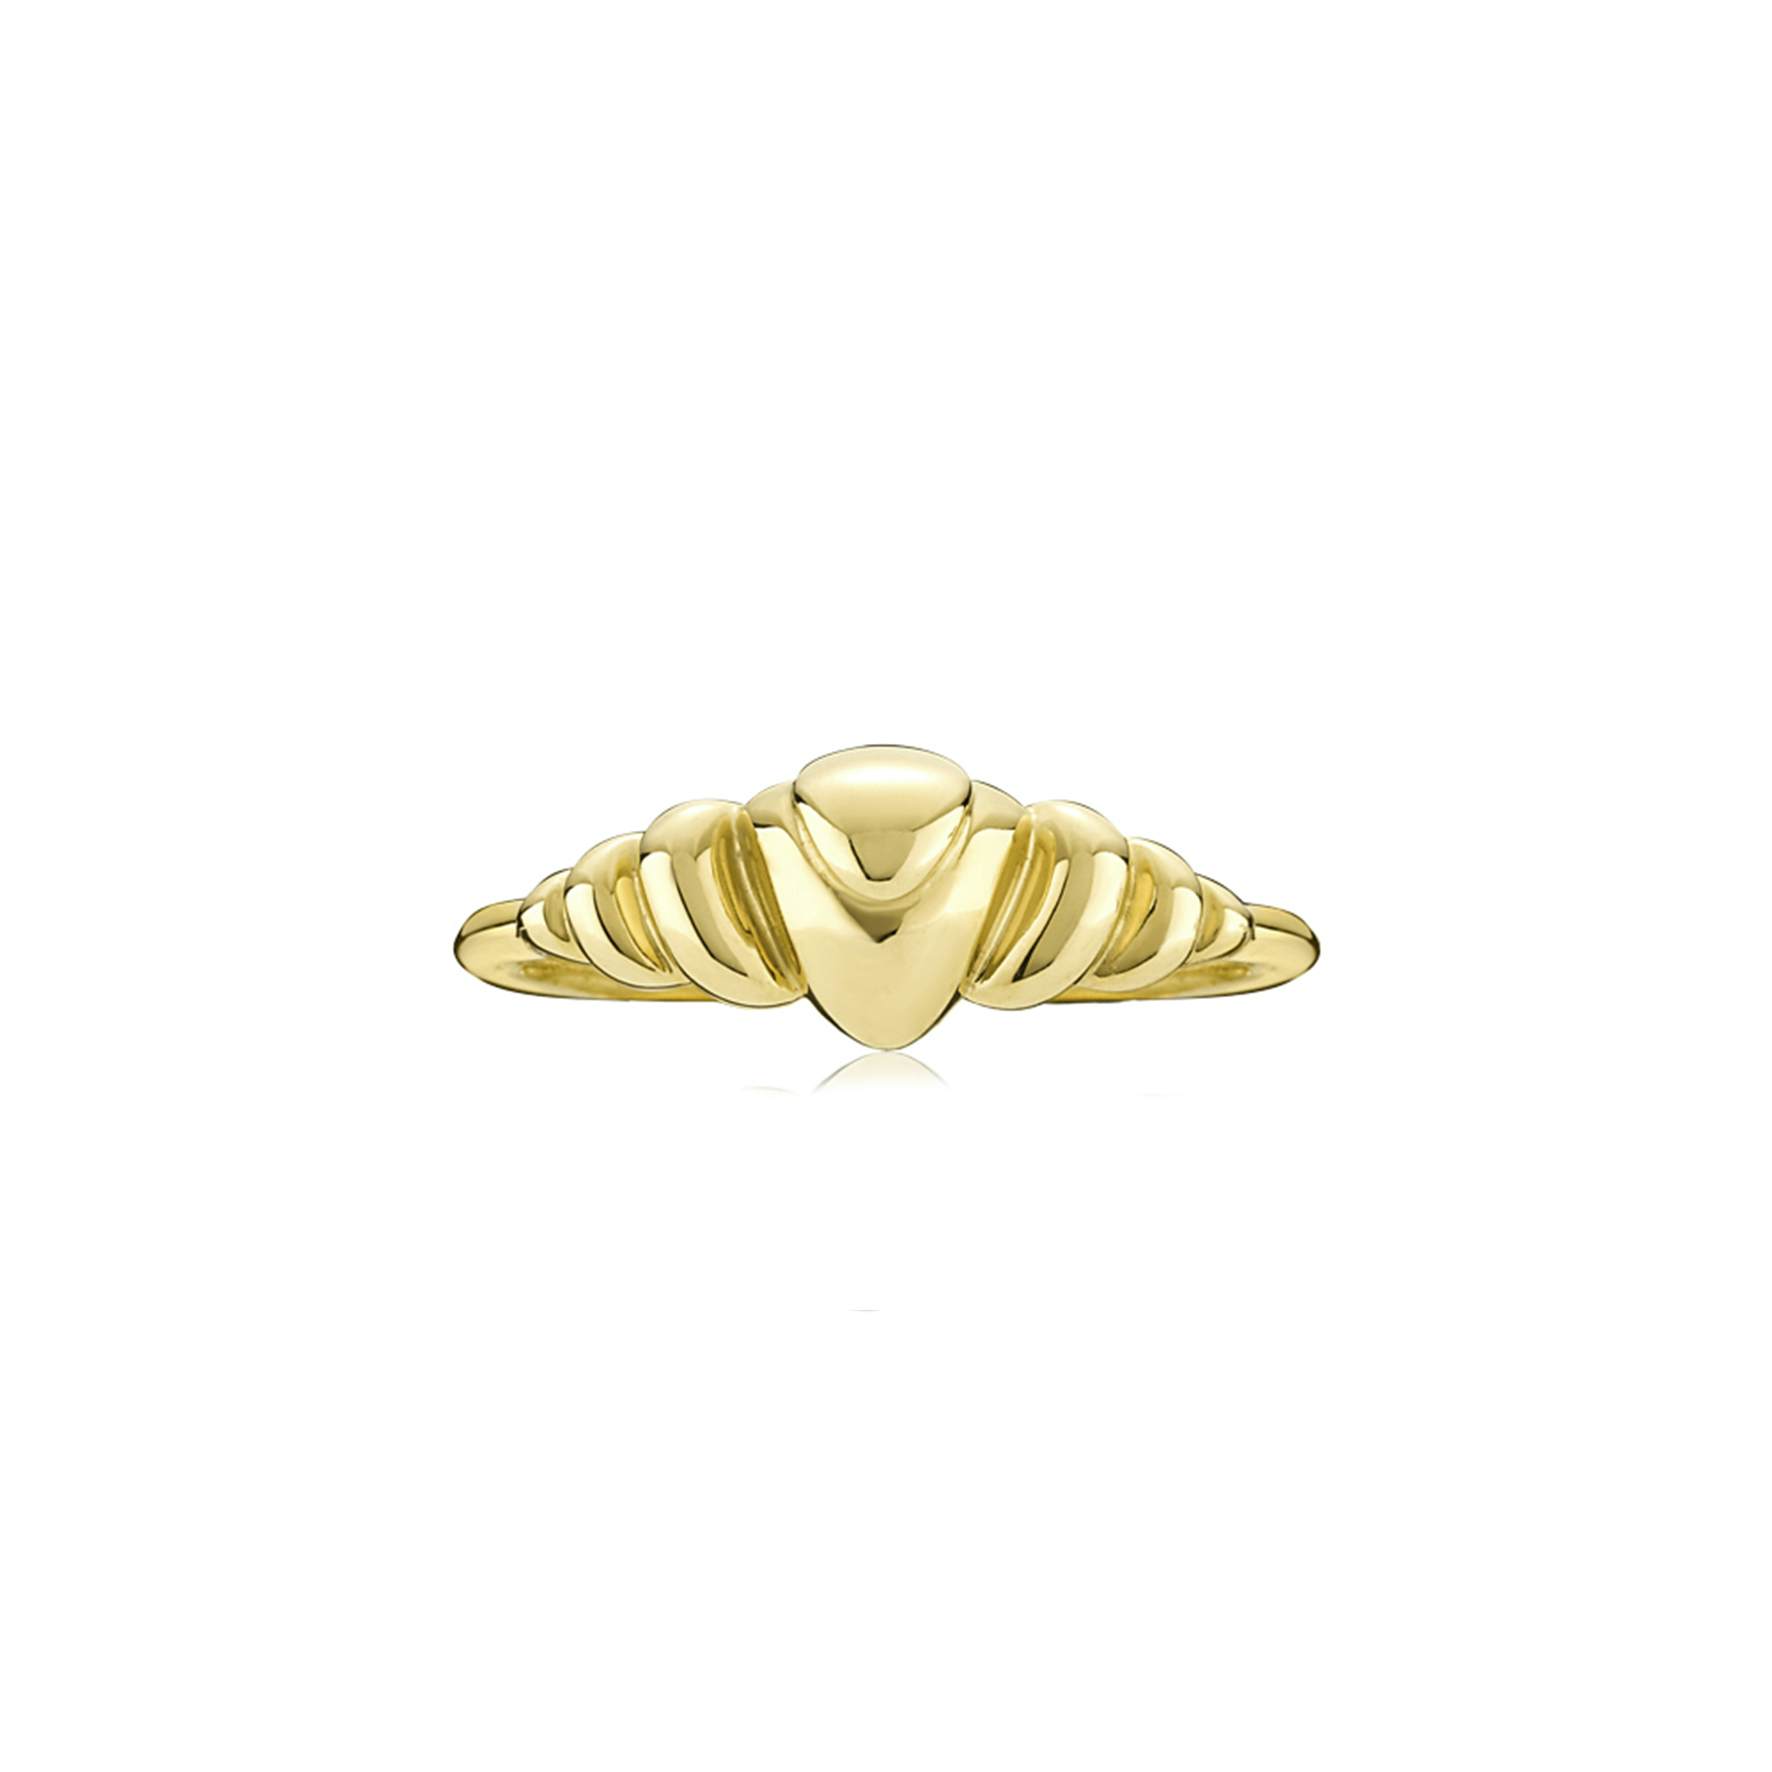 Frederikke Wærens by Sistie Croissant Ring from Sistie in Goldplated-Silver Sterling 925